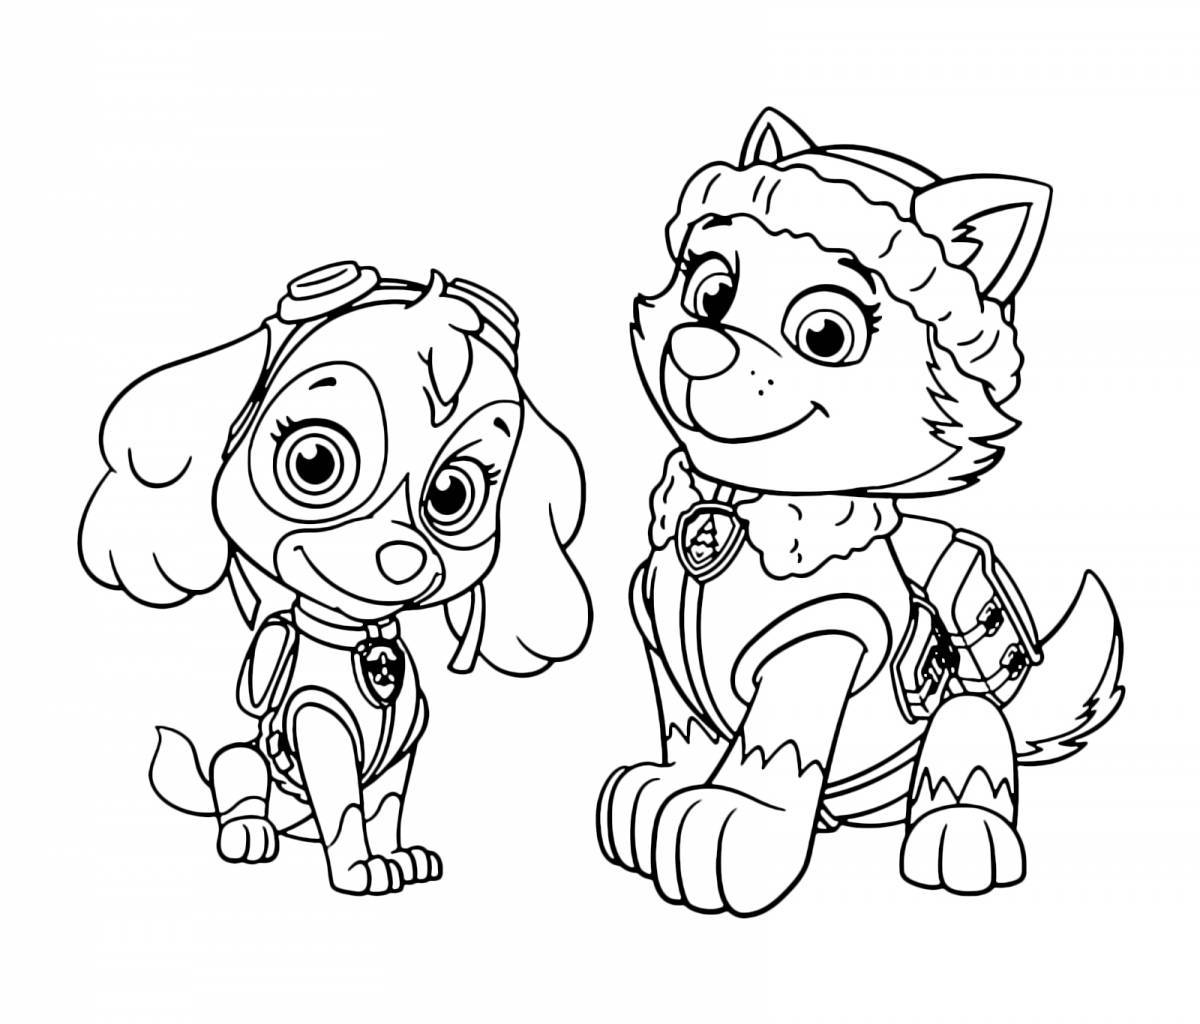 Awesome paw patrol coloring page for kids